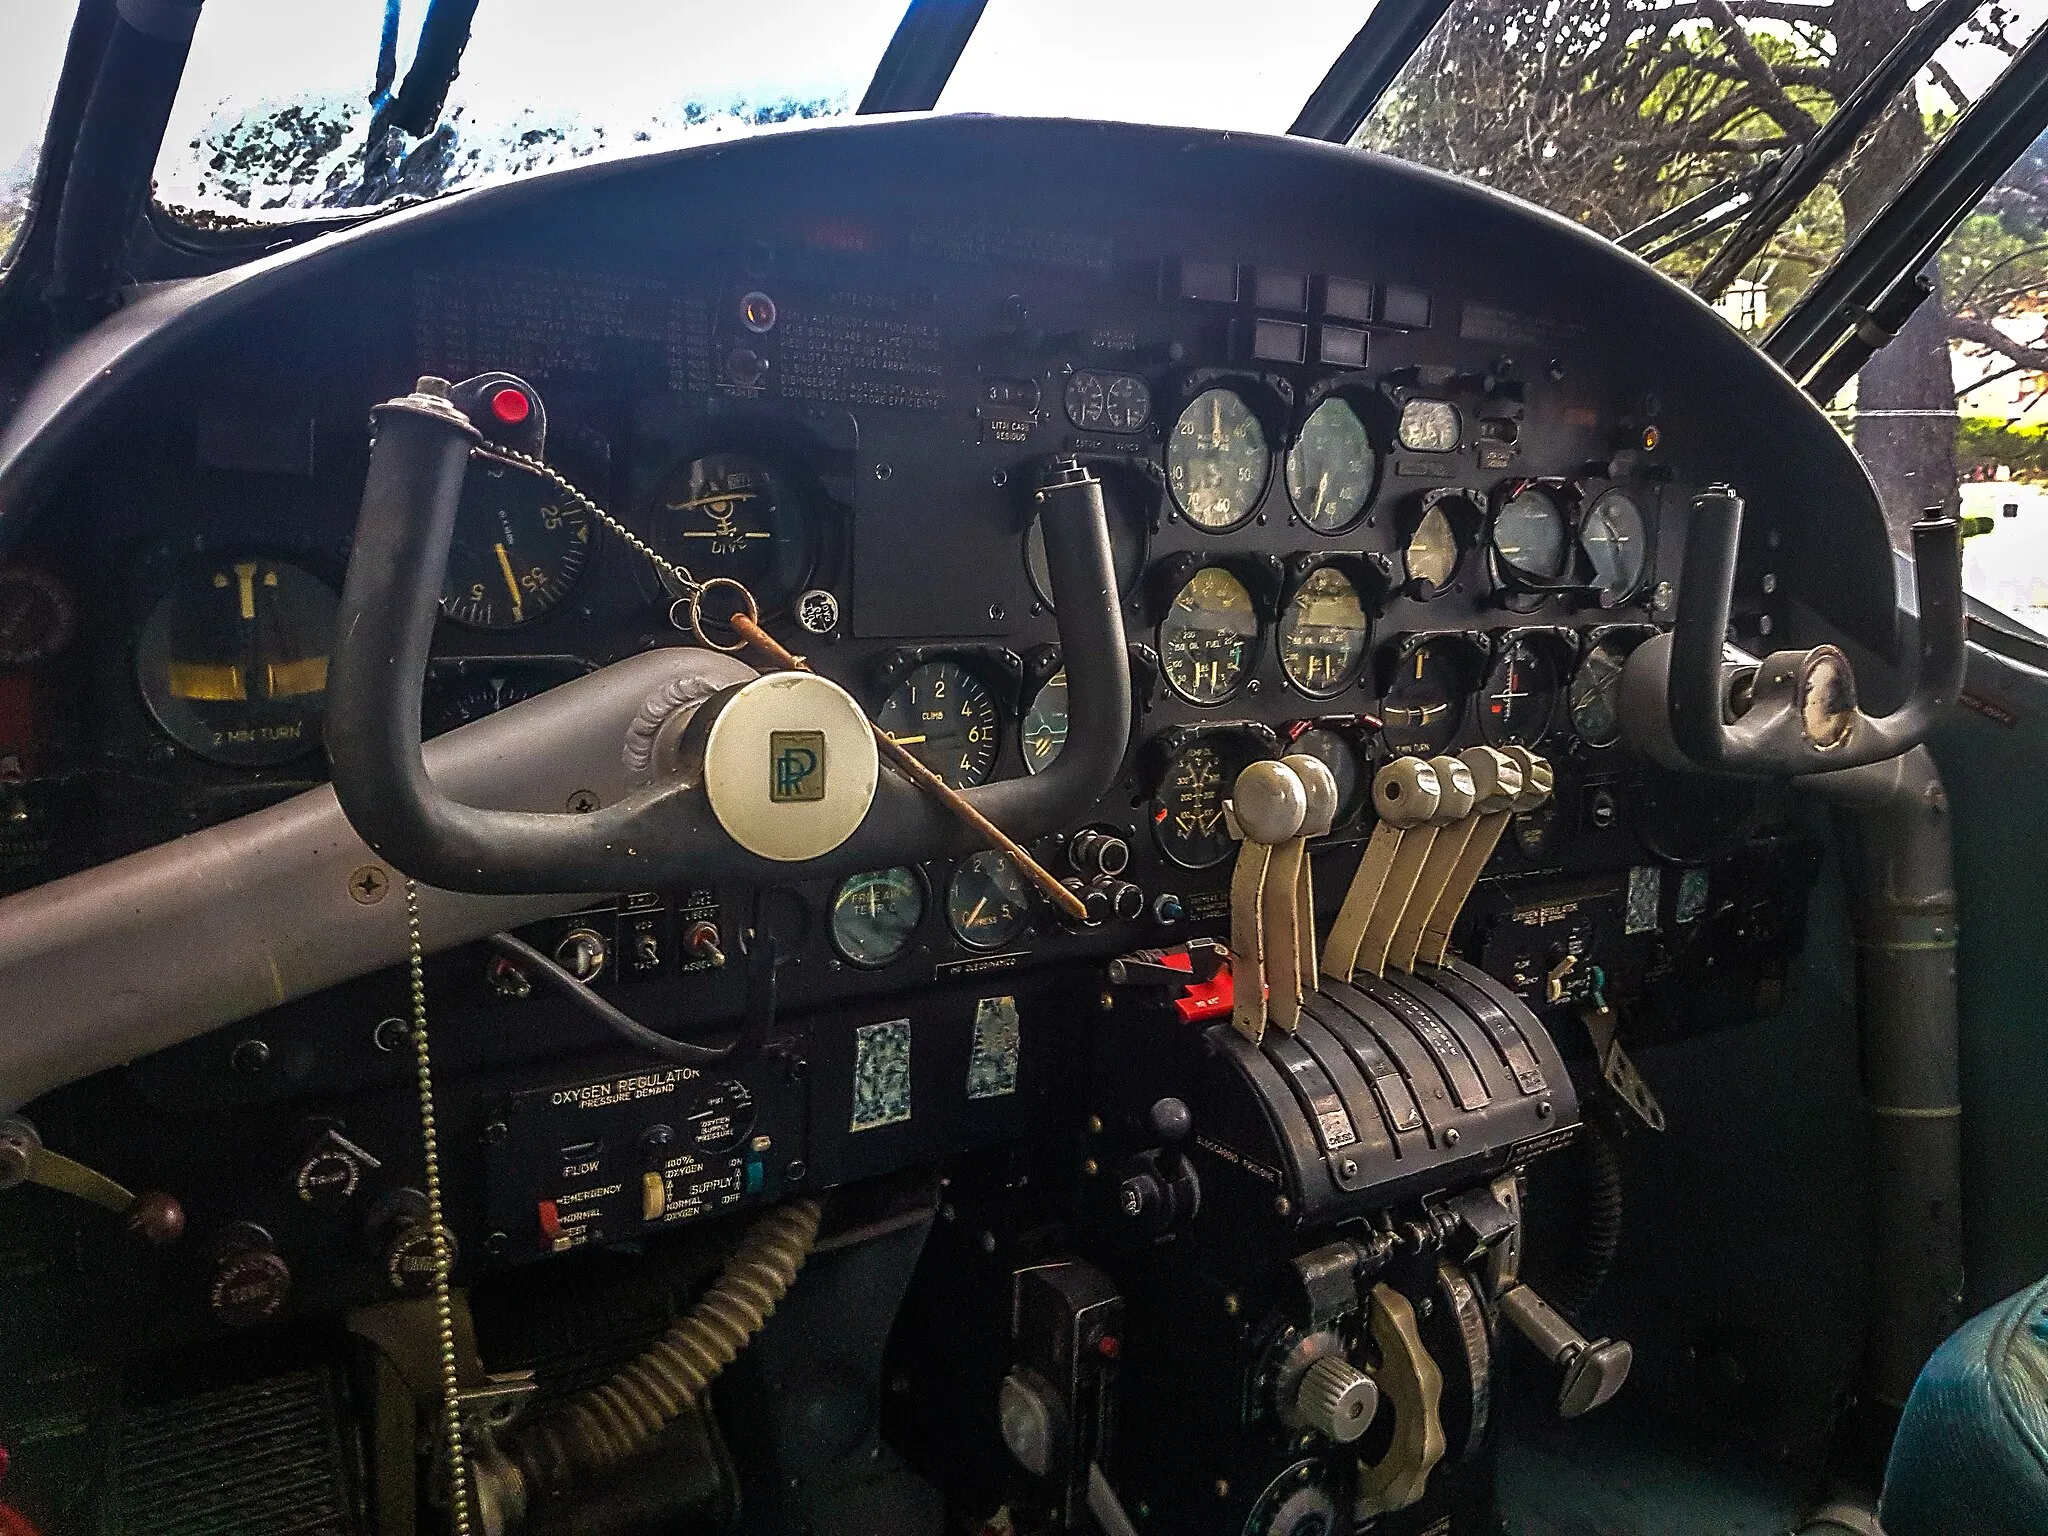 Photo showing: Cockpit of an Italian Air Force Piaggio P166 aircraft.